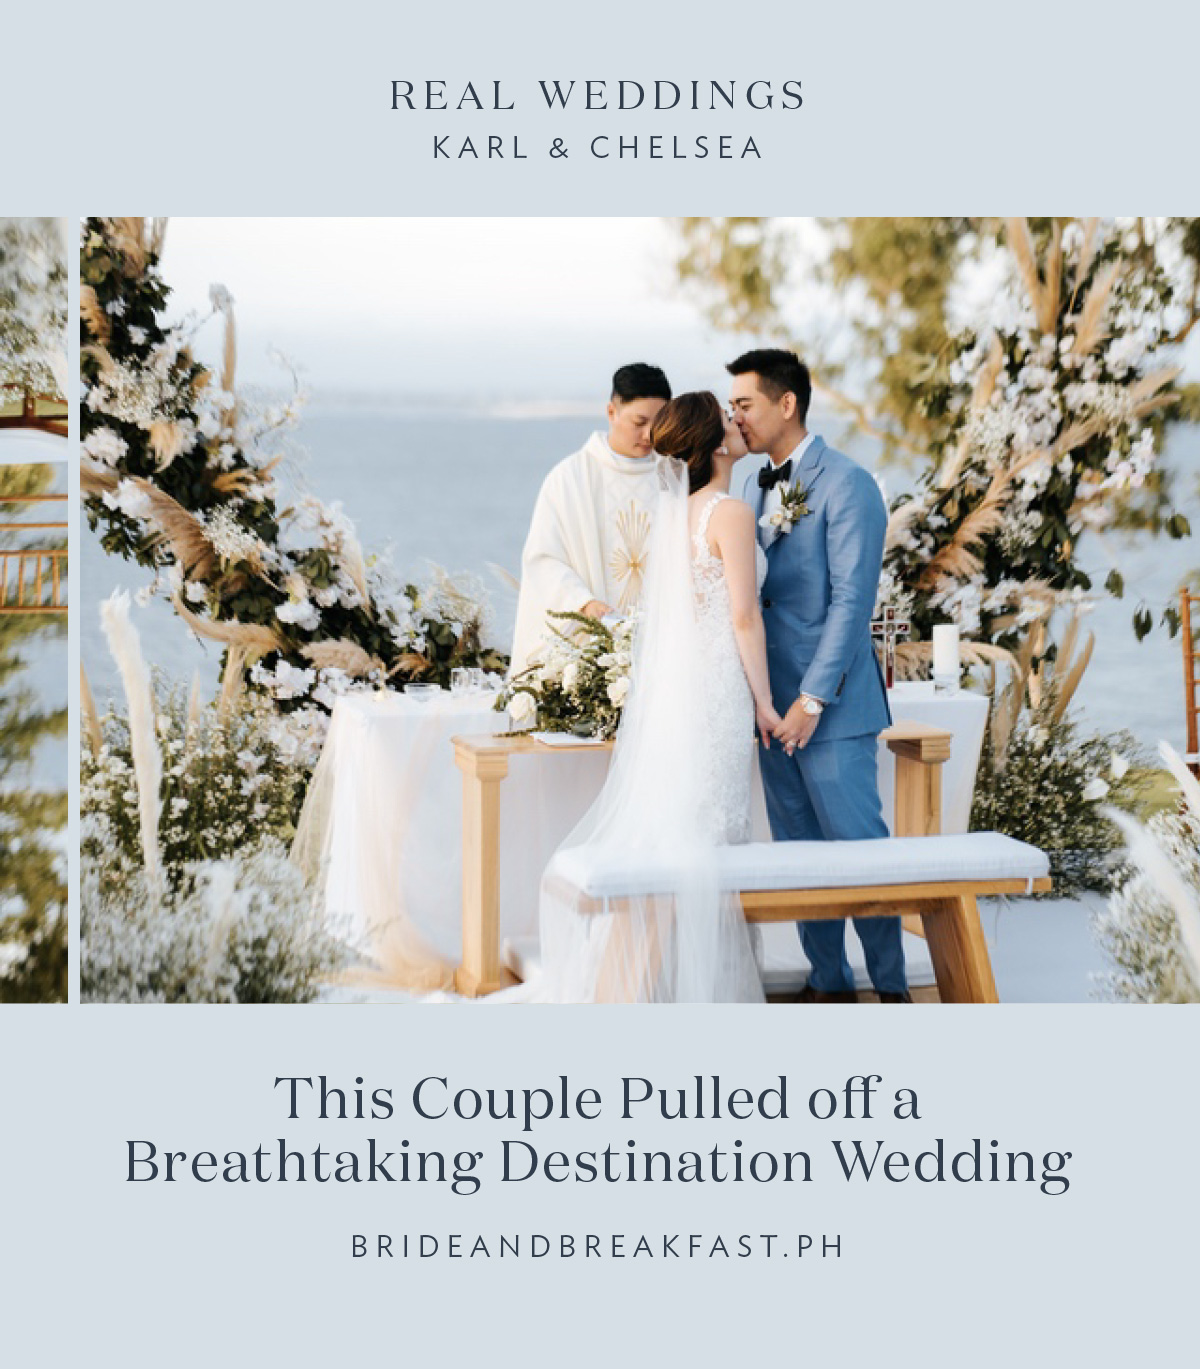 This Couple Pulled off a Breathtaking Destination Wedding